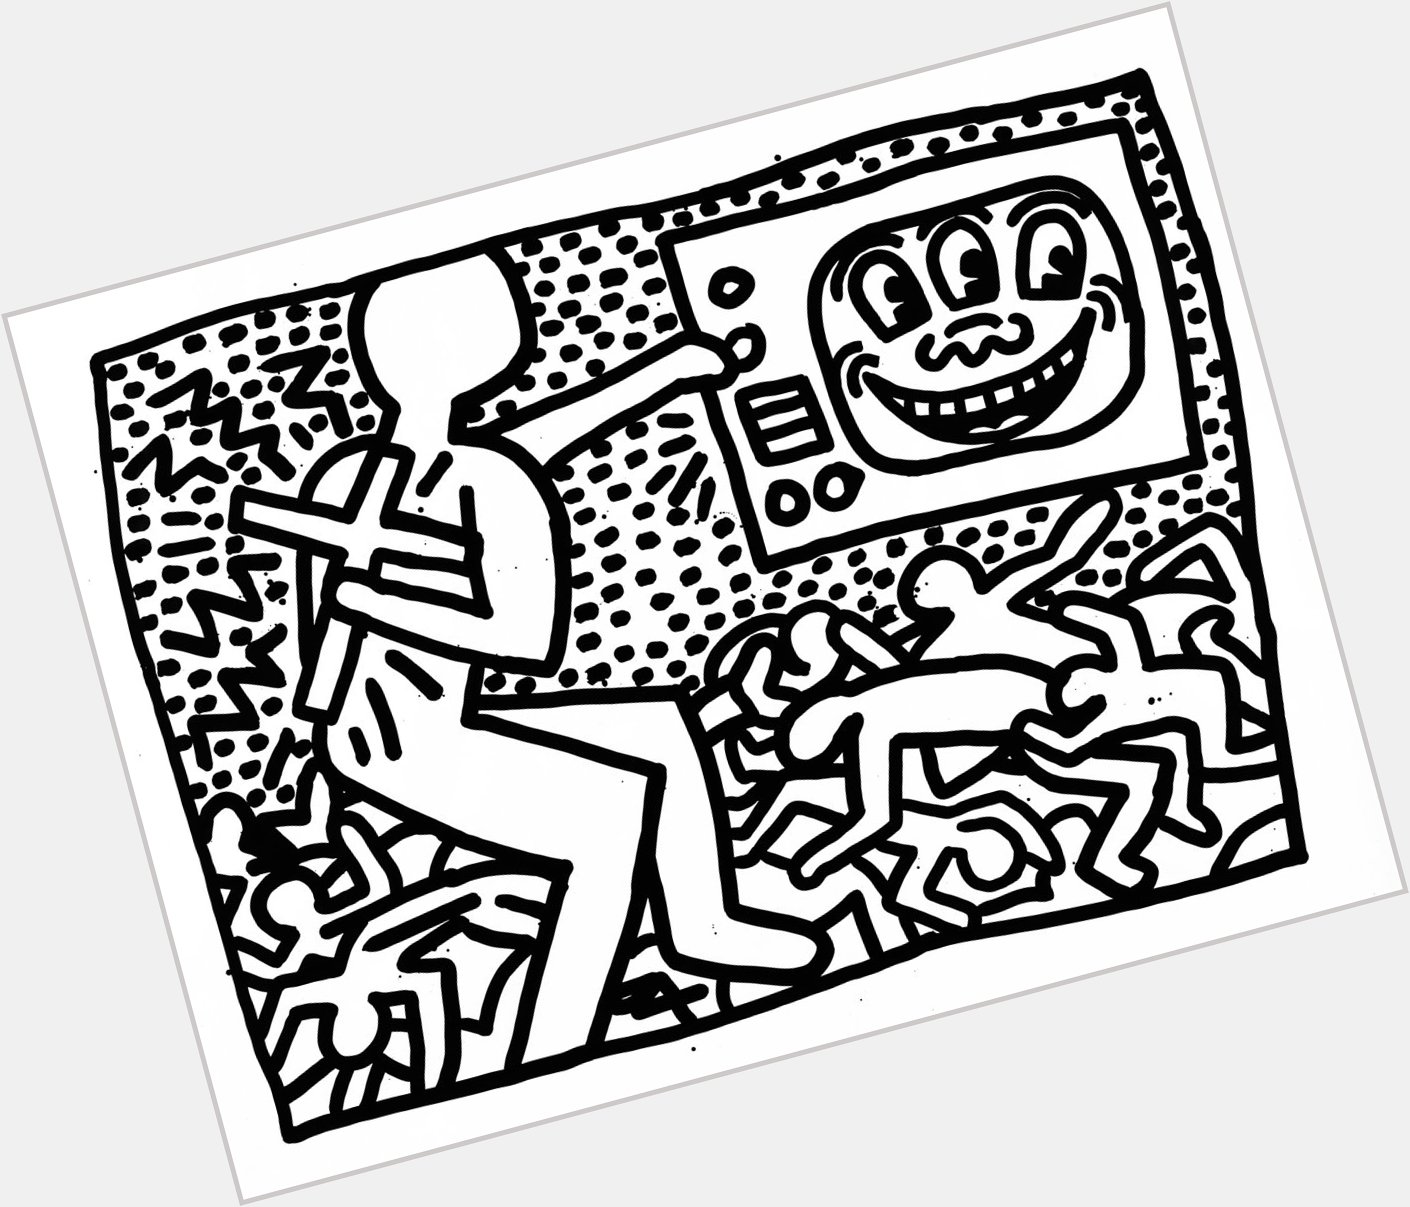 My mom got me a Keith Haring coloring book in the early 90s. Changed my life. Happy Birthday, Keith! 